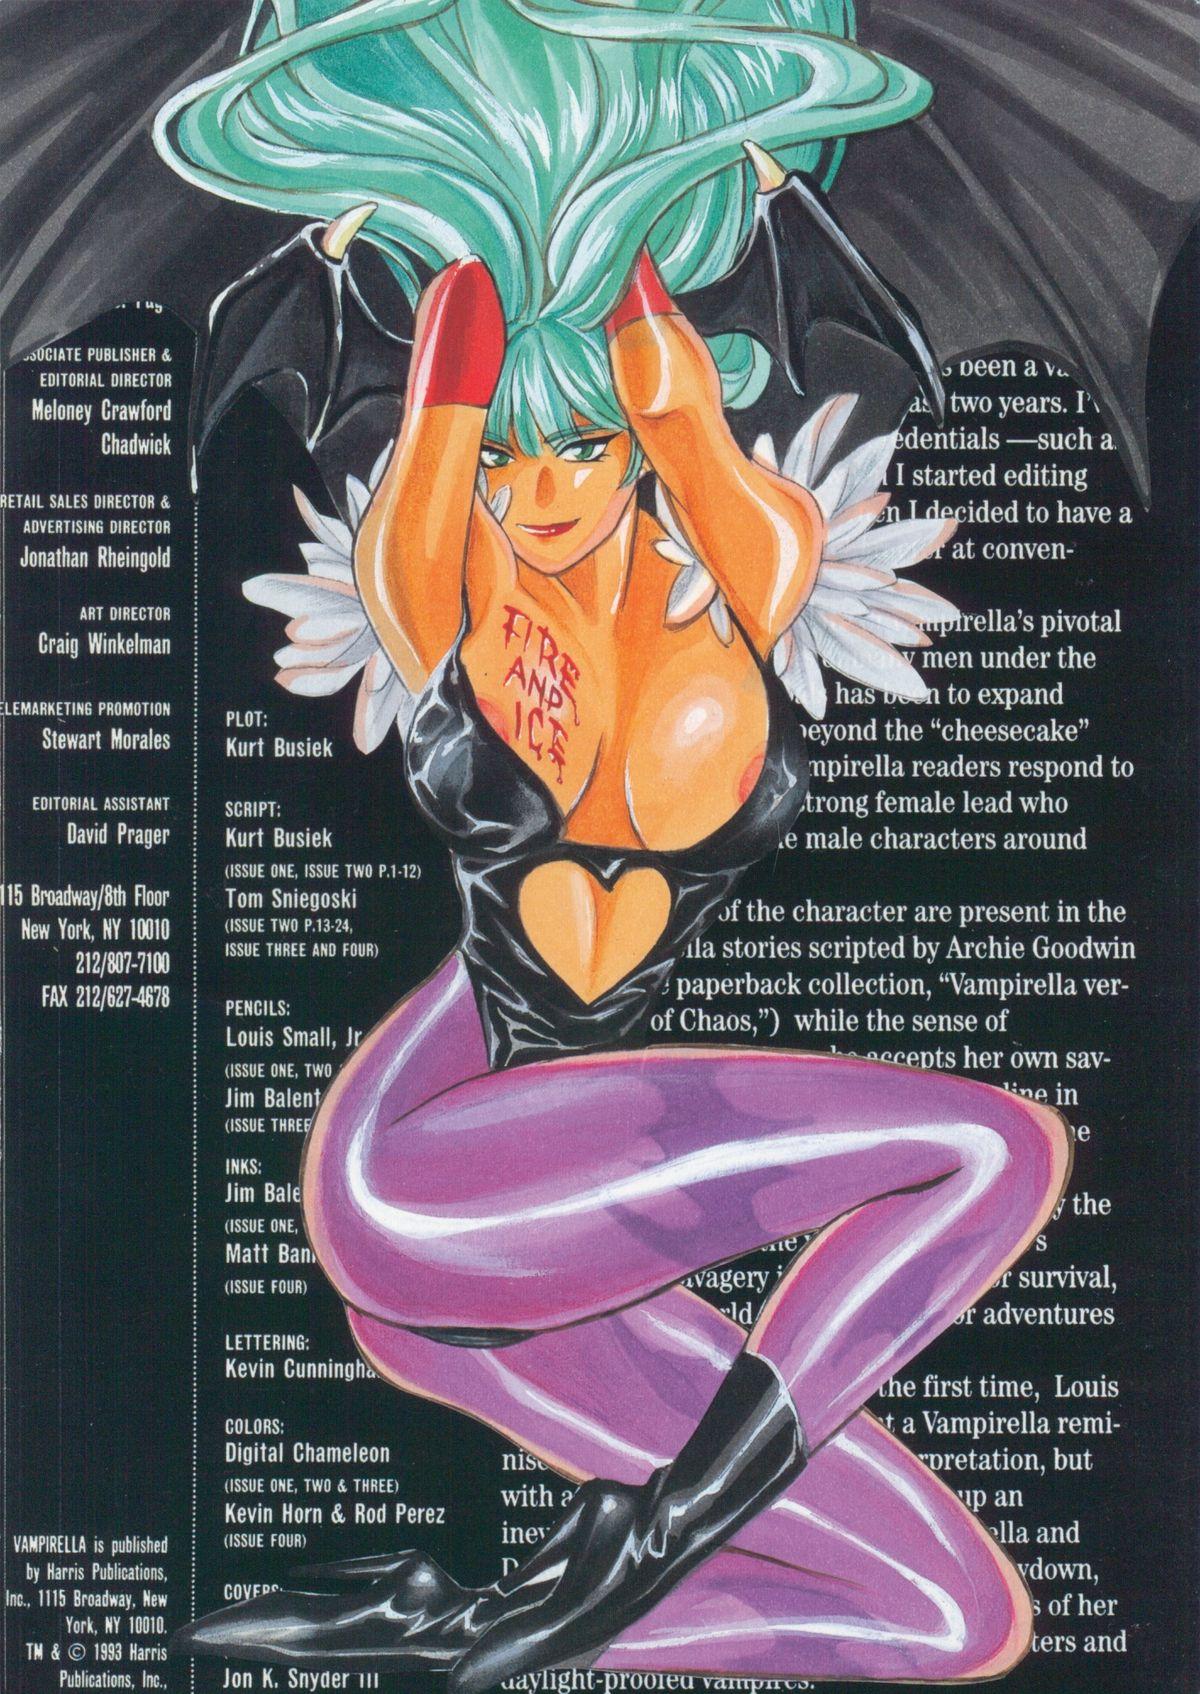 Missionary Fire and Ice - Darkstalkers Fitness - Picture 1